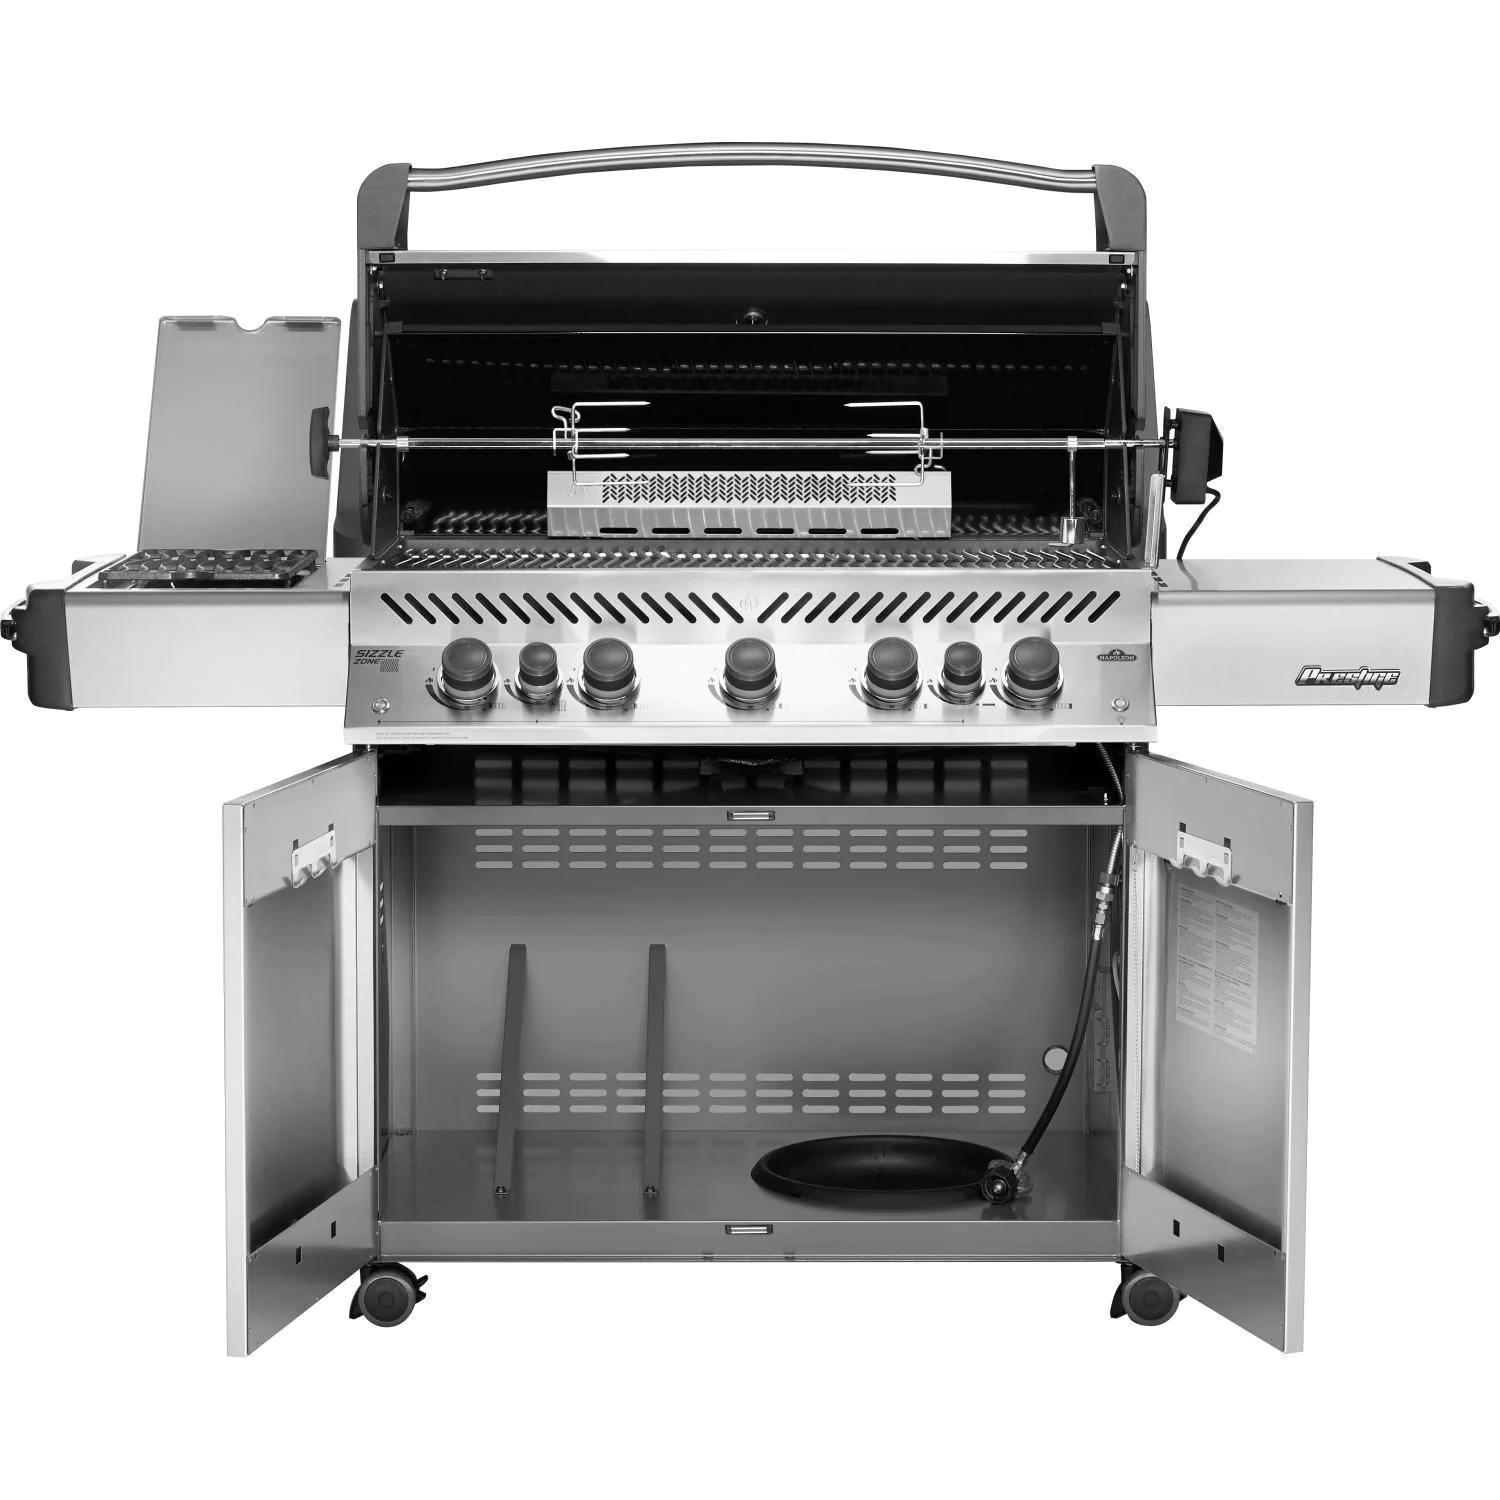 Napoleon Prestige 665 Propane Gas Grill with Infrared Rear Burner and Infrared Side Burner and Rotisserie Kit